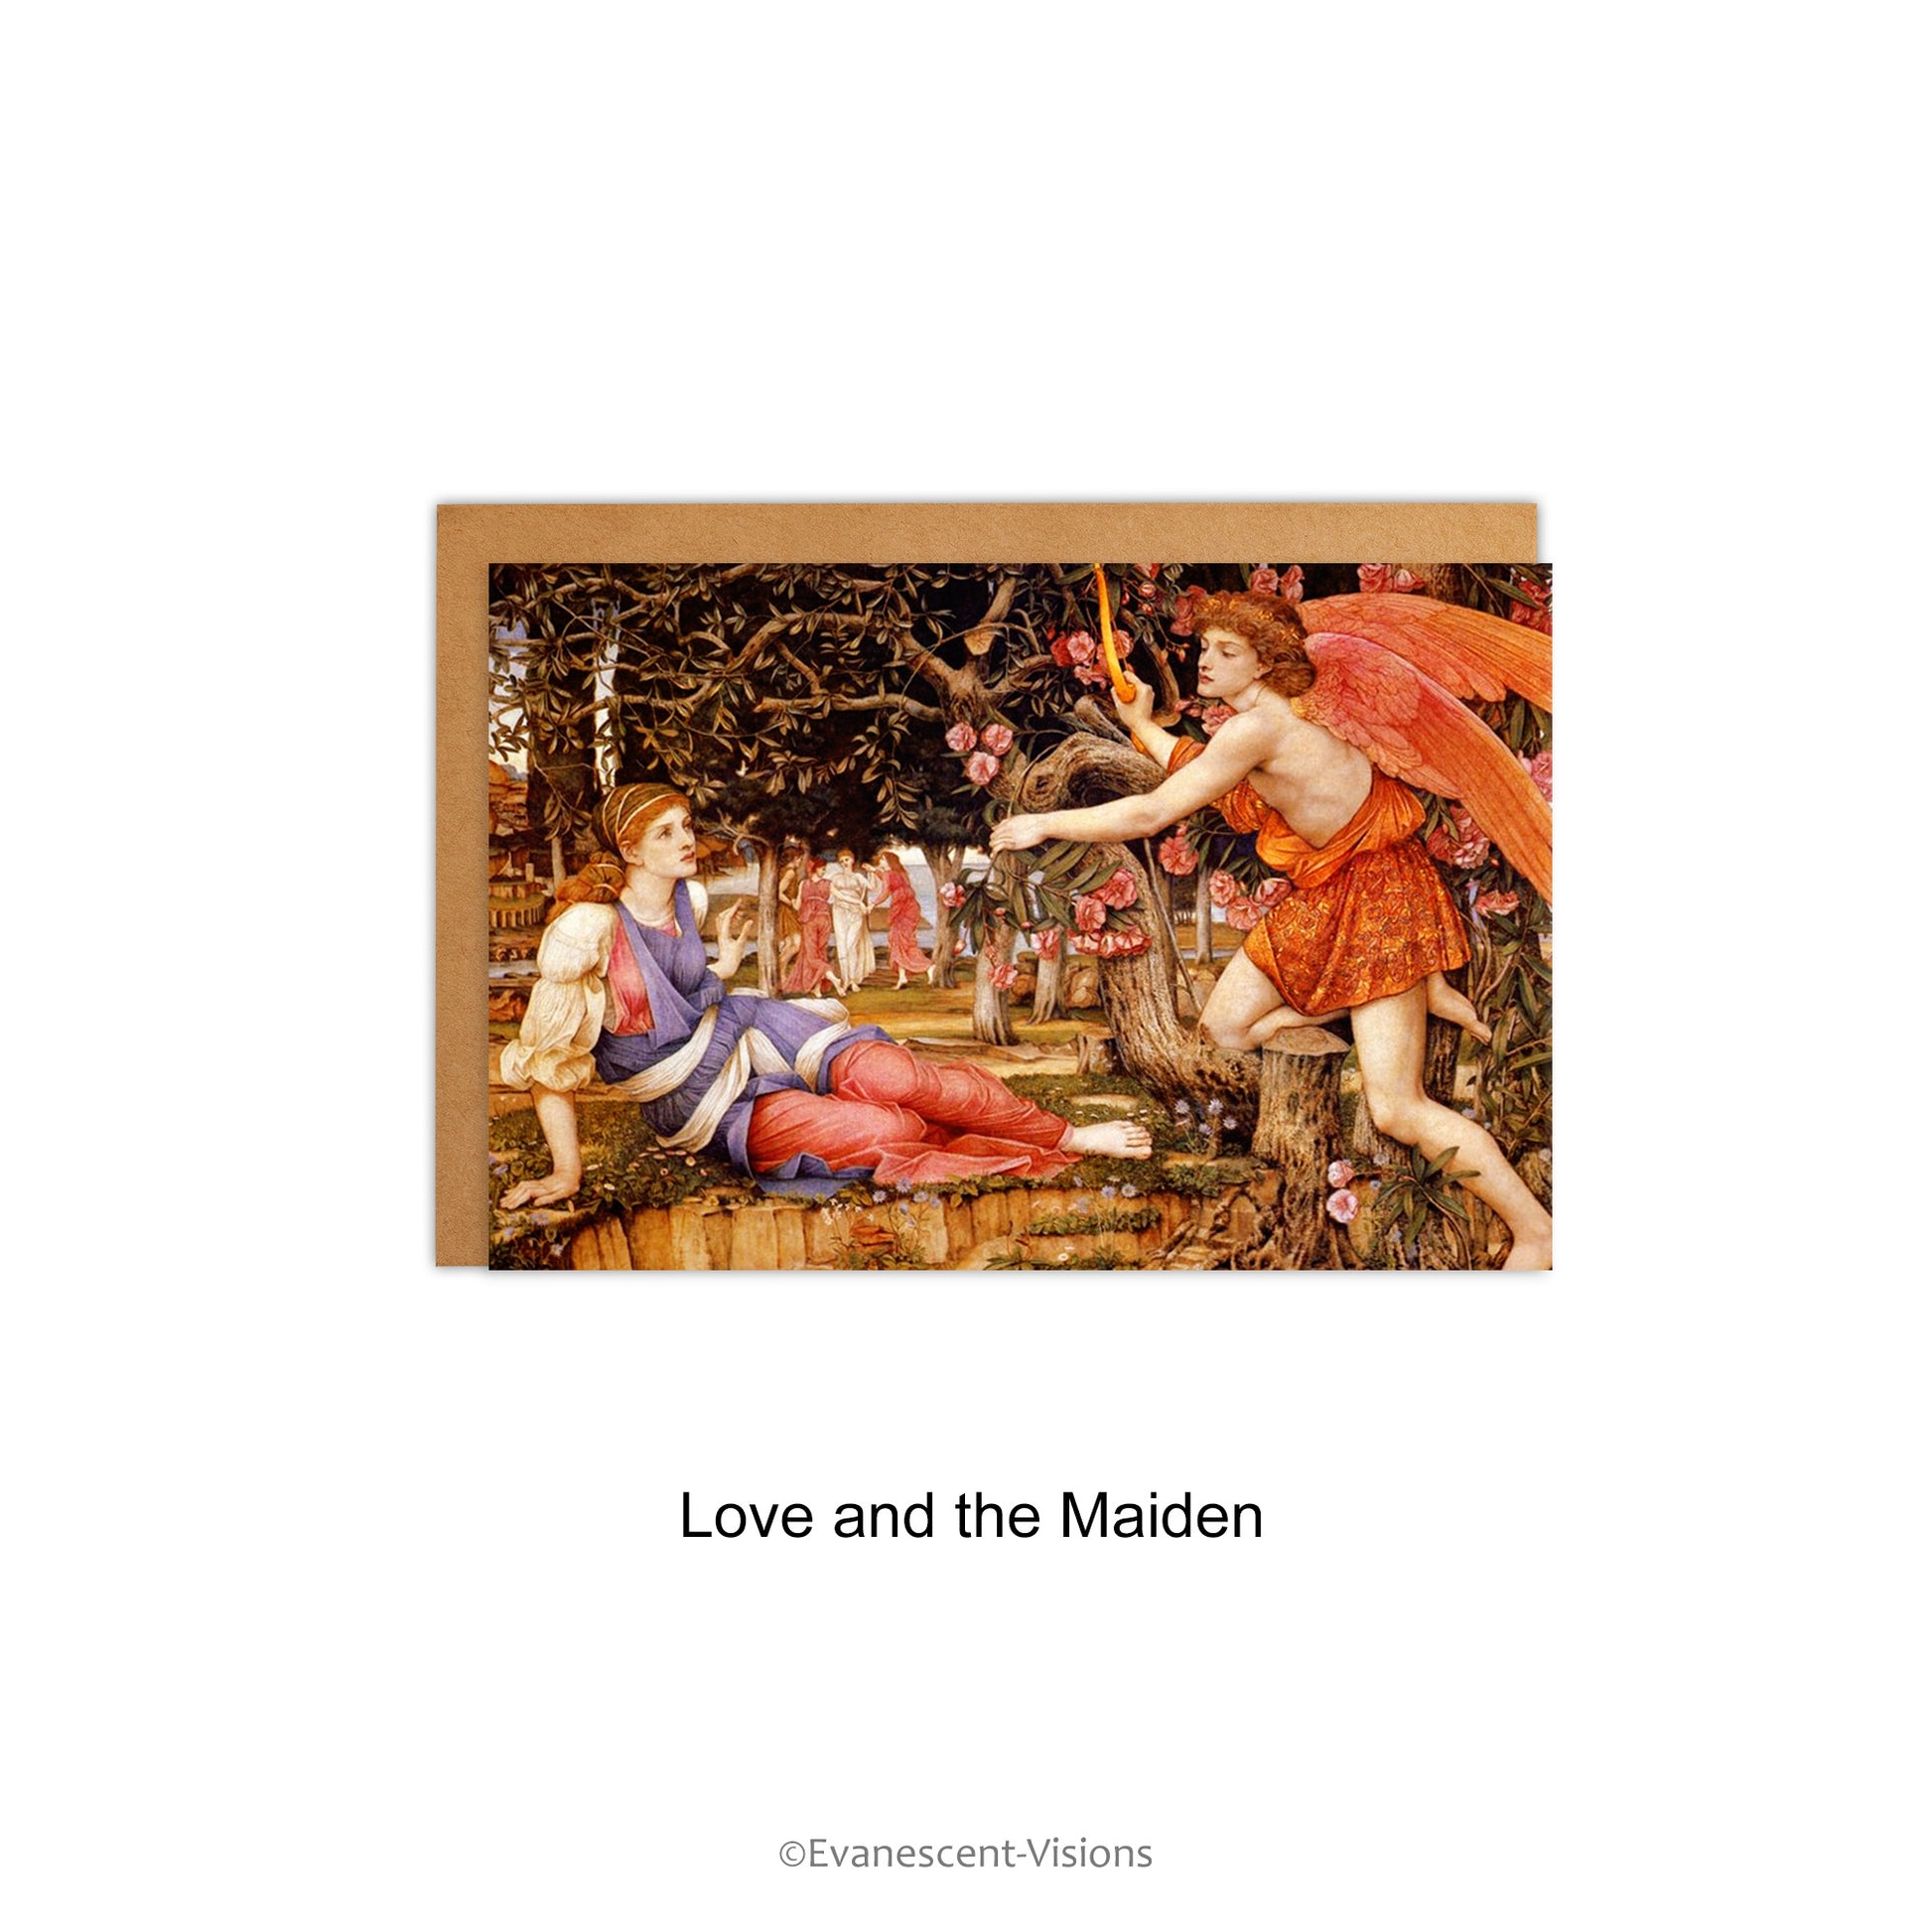 Design Choice, Love and the Maiden